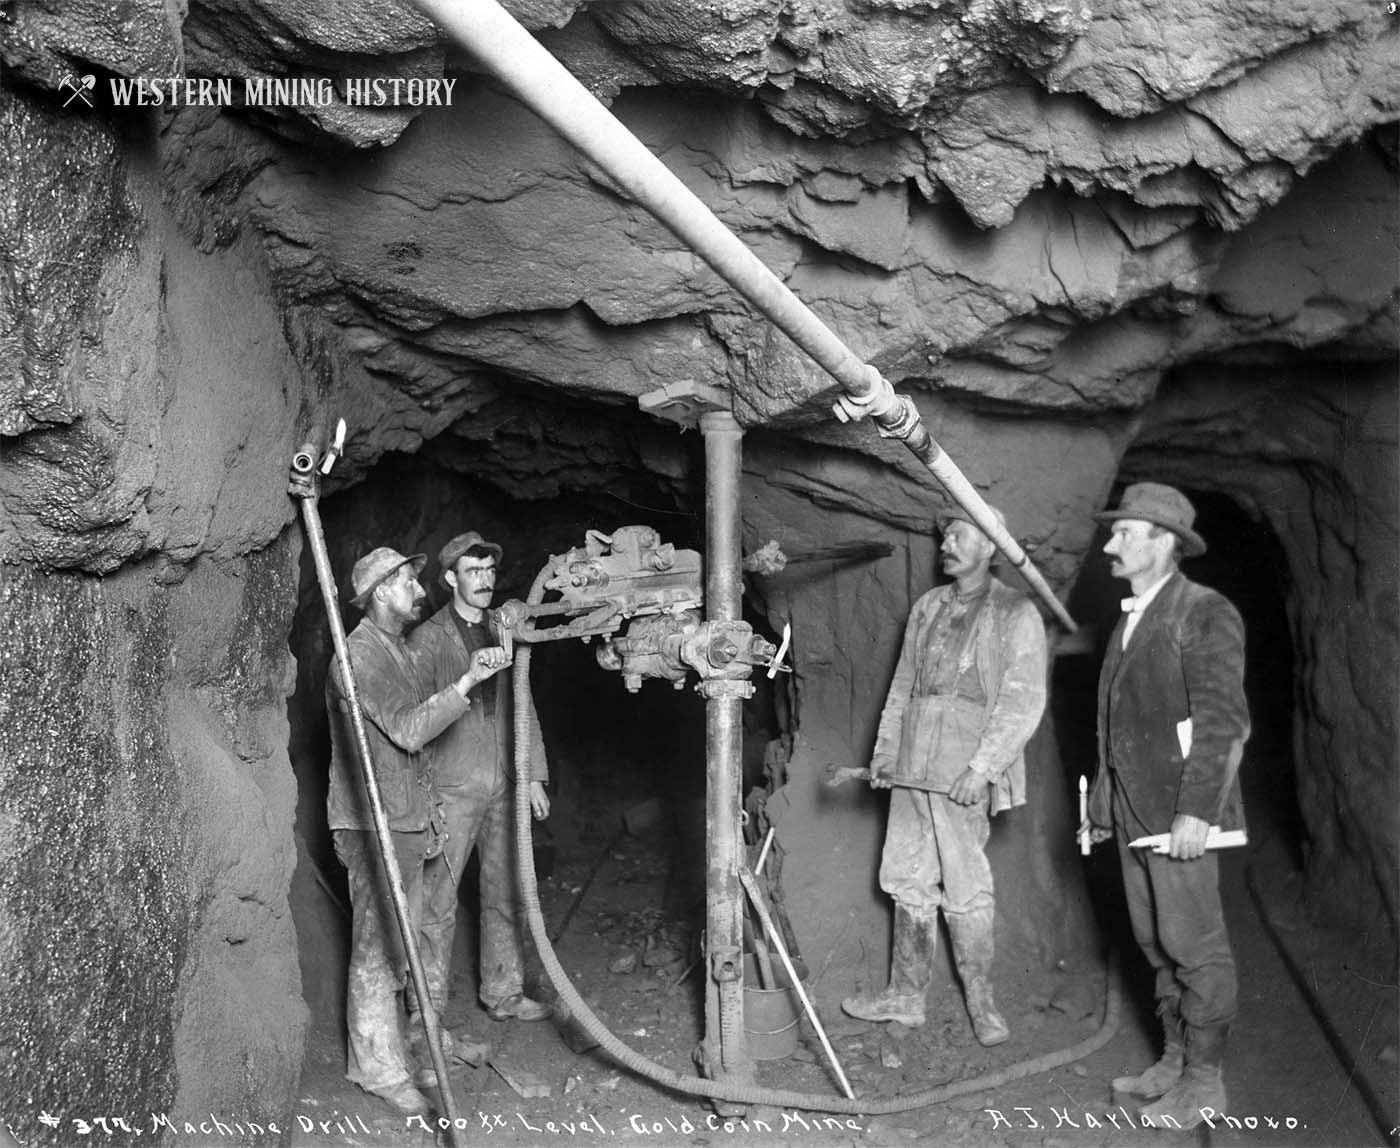 Drilling in the Gold Coin Mine - Victor, Colorado 